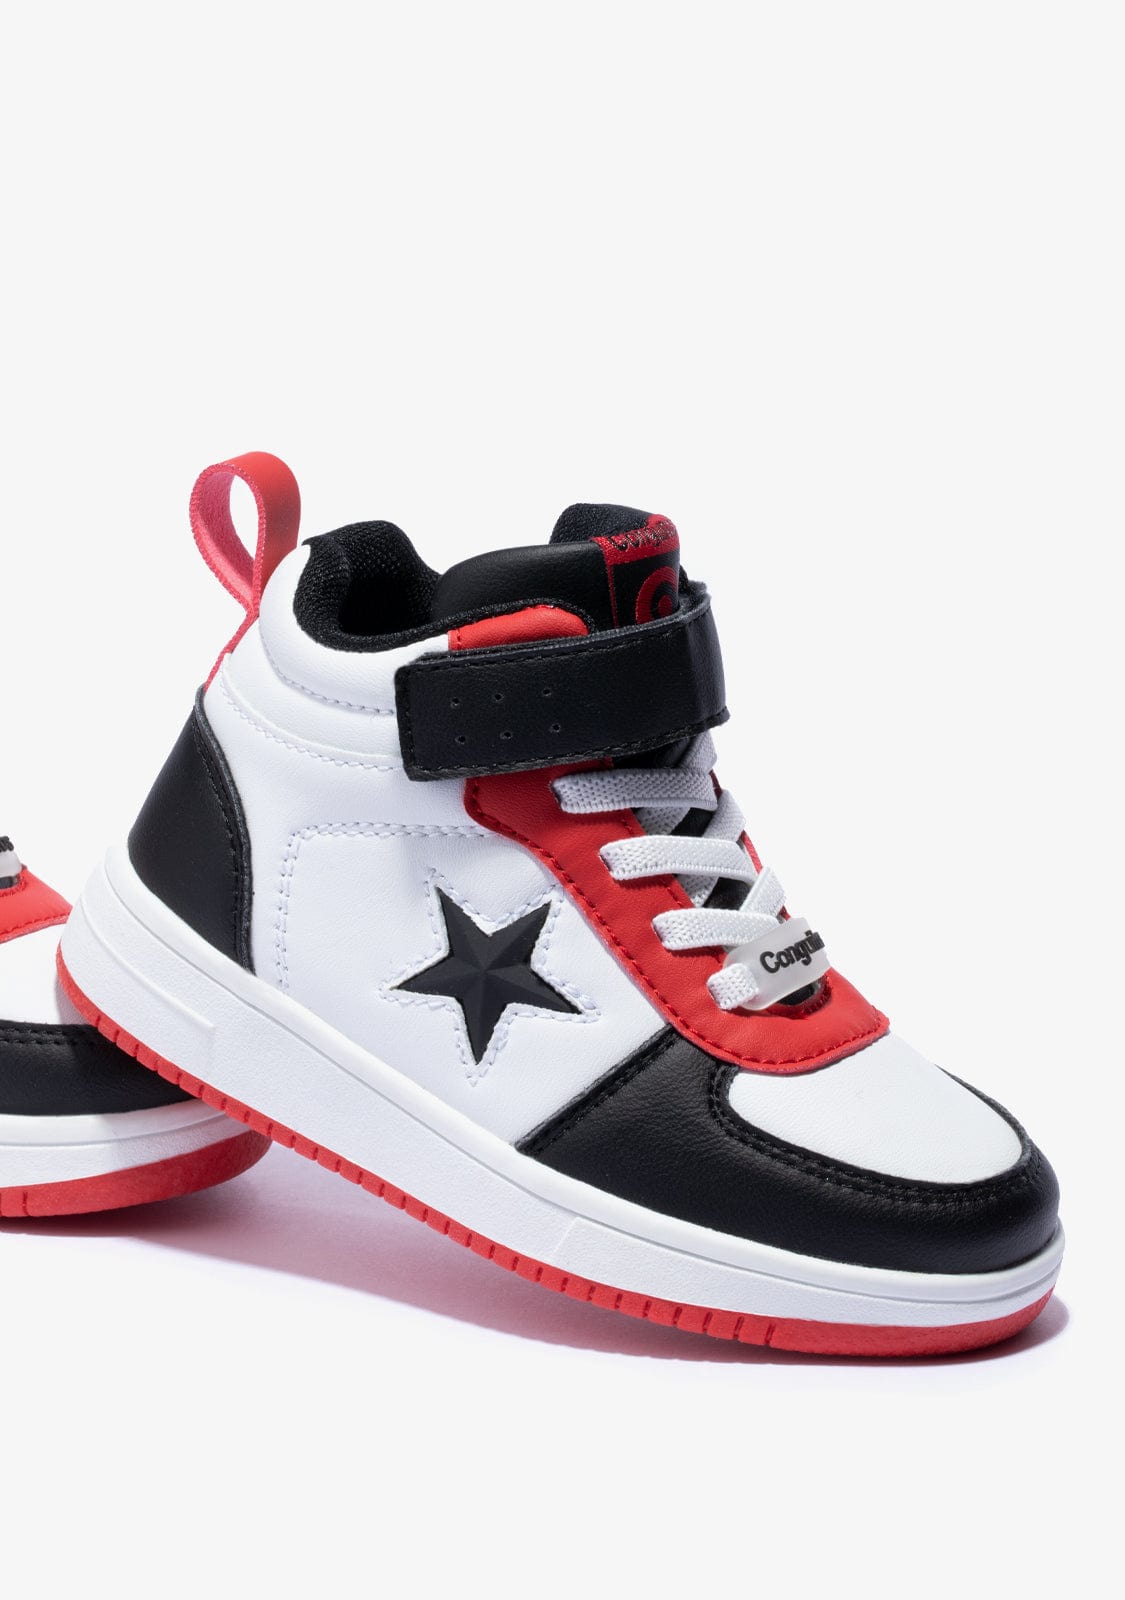 CONGUITOS Shoes Unisex Black With Lights Star Hi-Top Sneakers